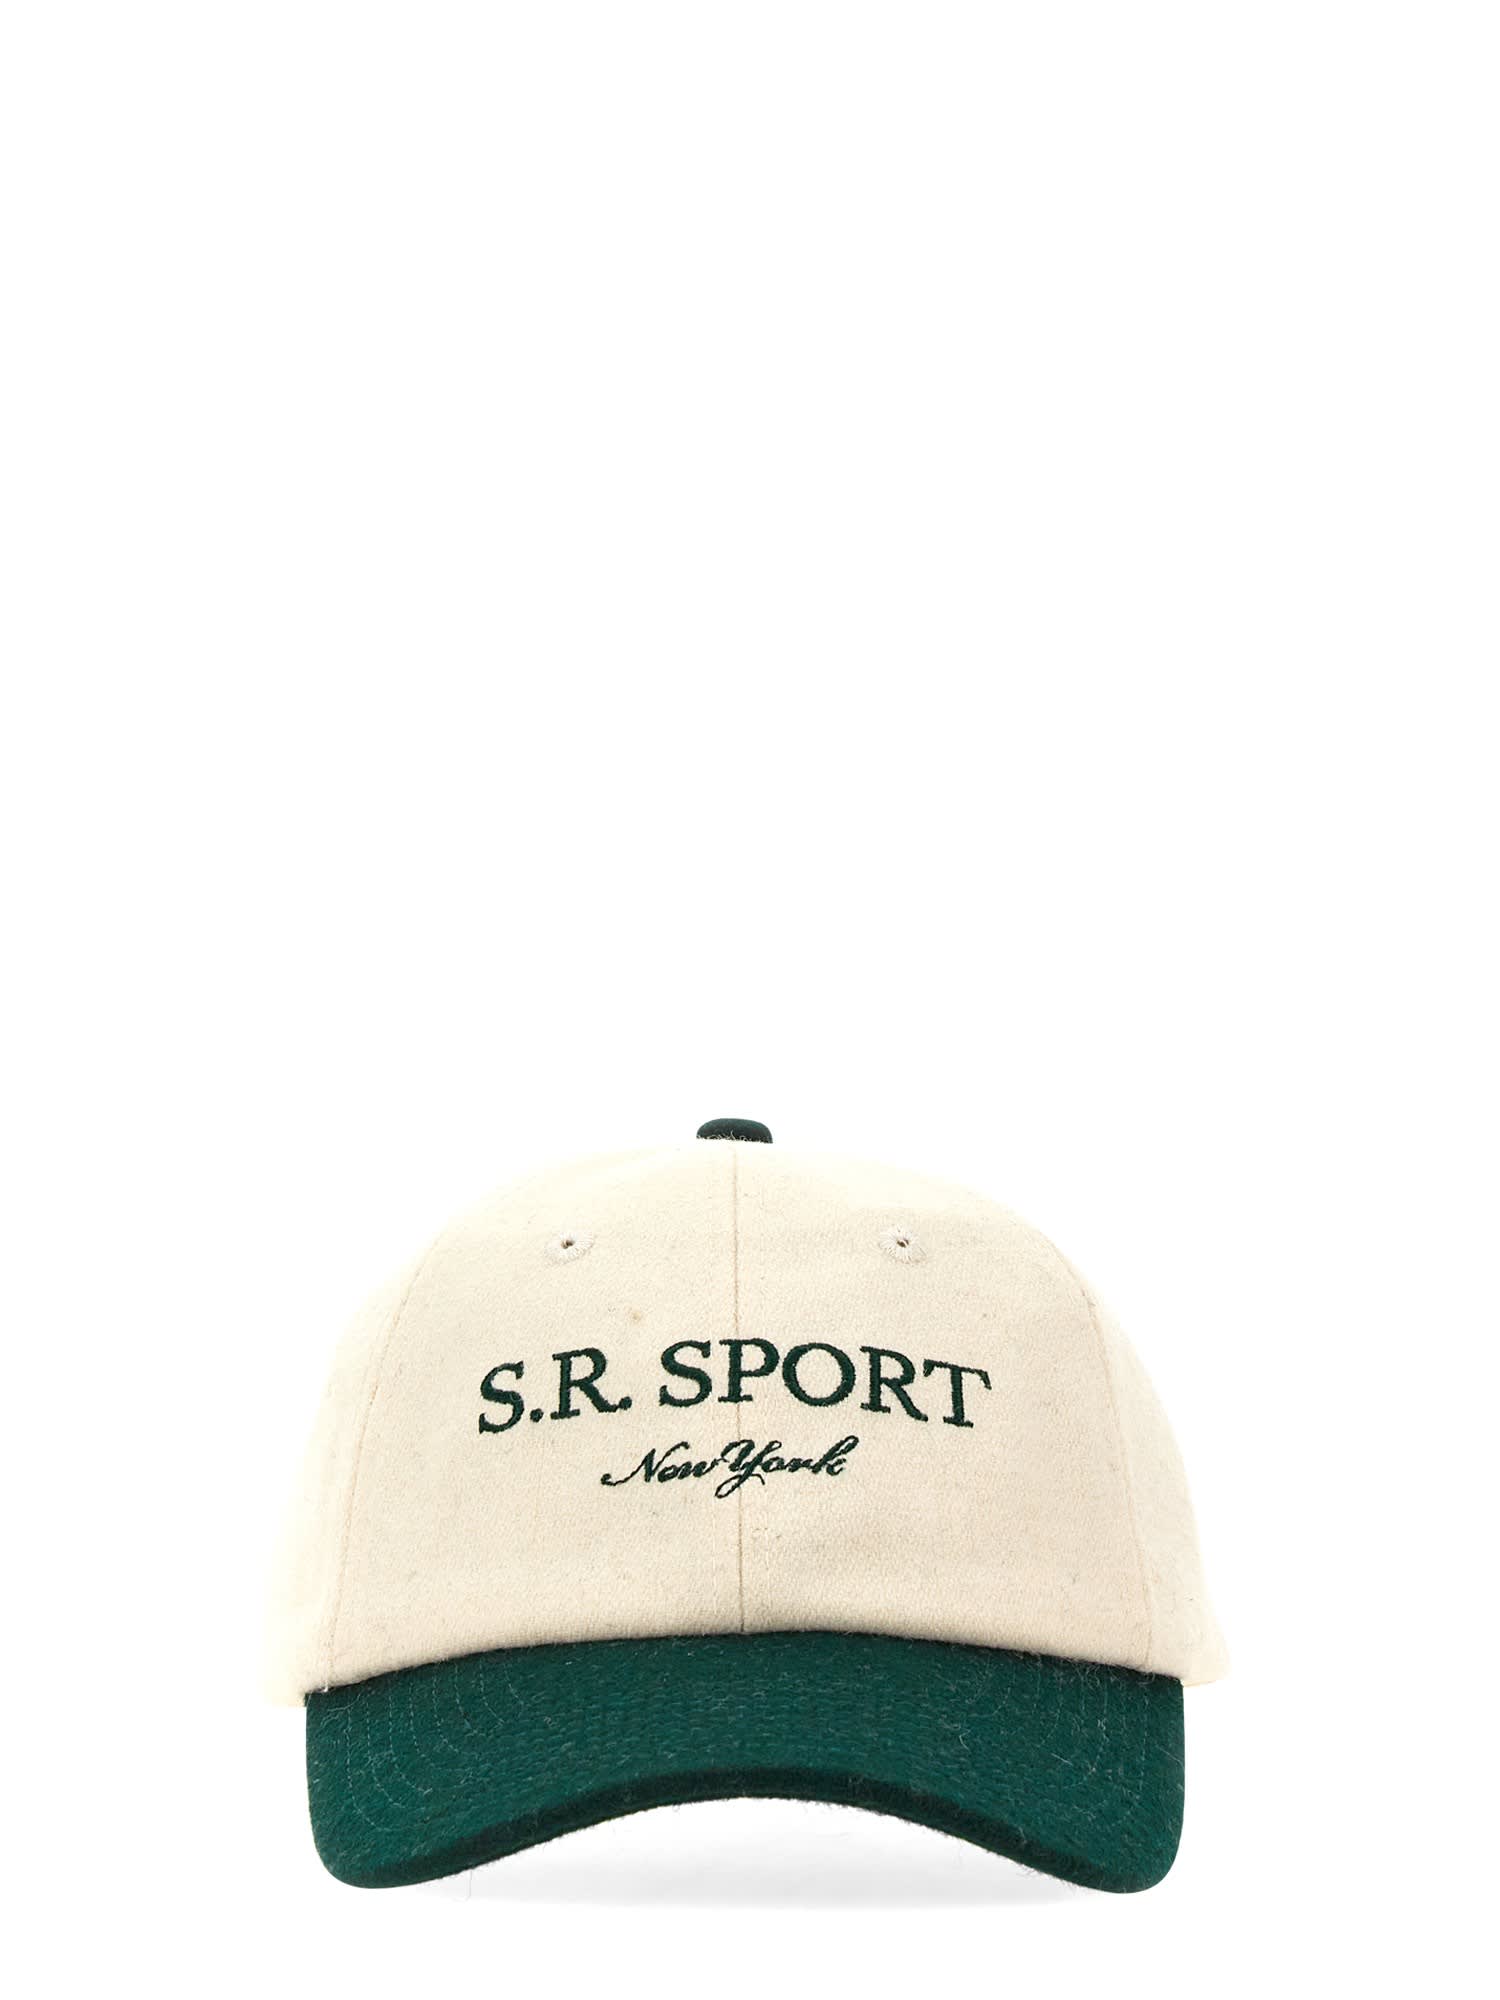 Sporty & Rich Hat With Logo